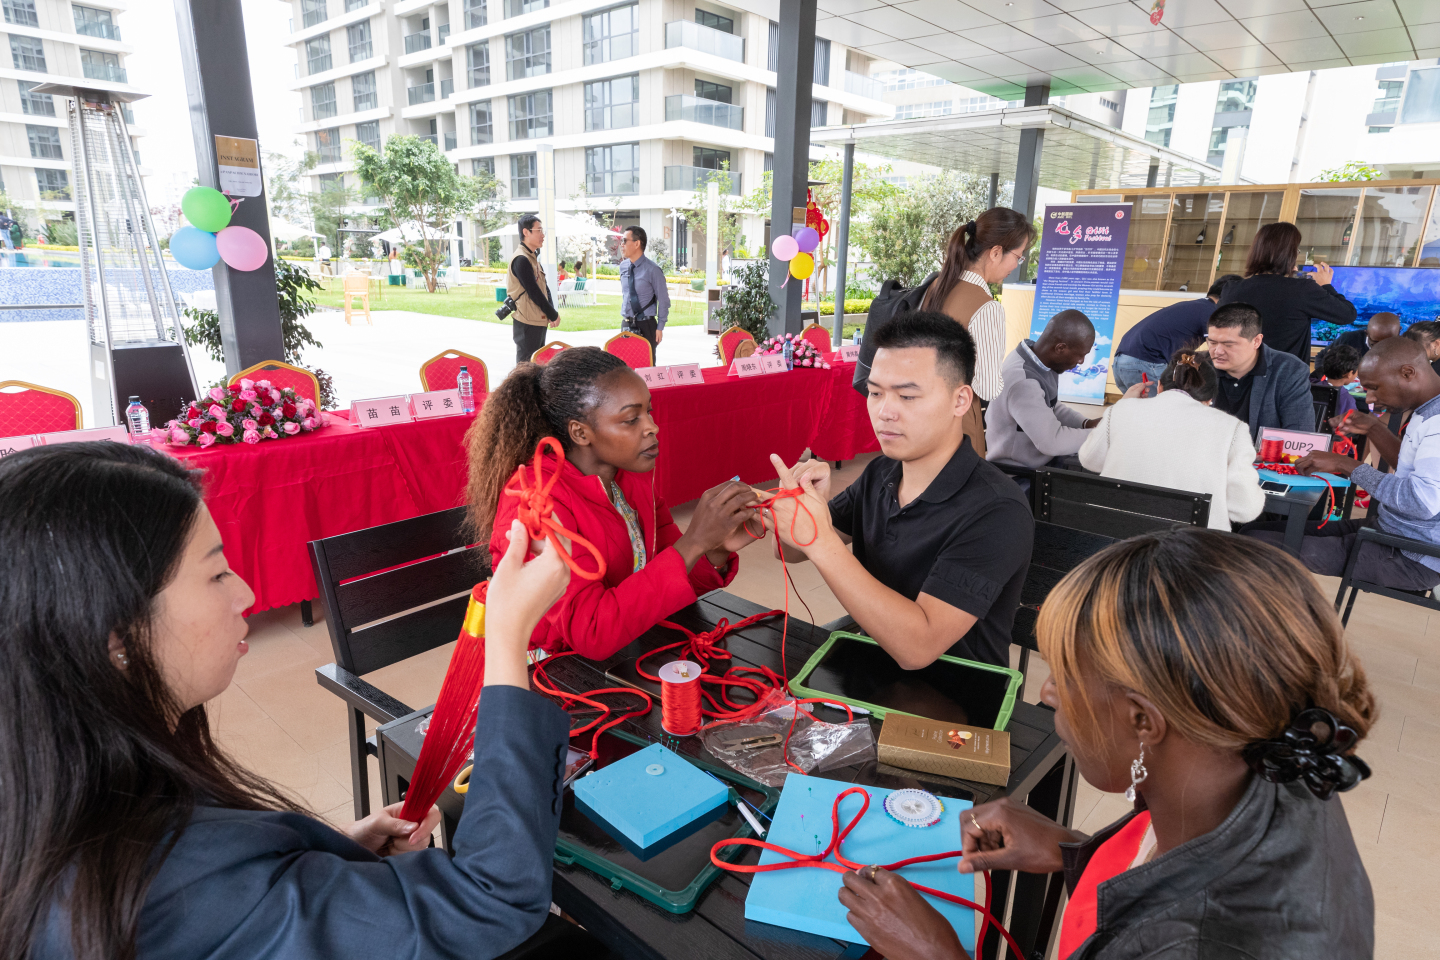 Chines and Kenyan employees interacting in a creative activity.